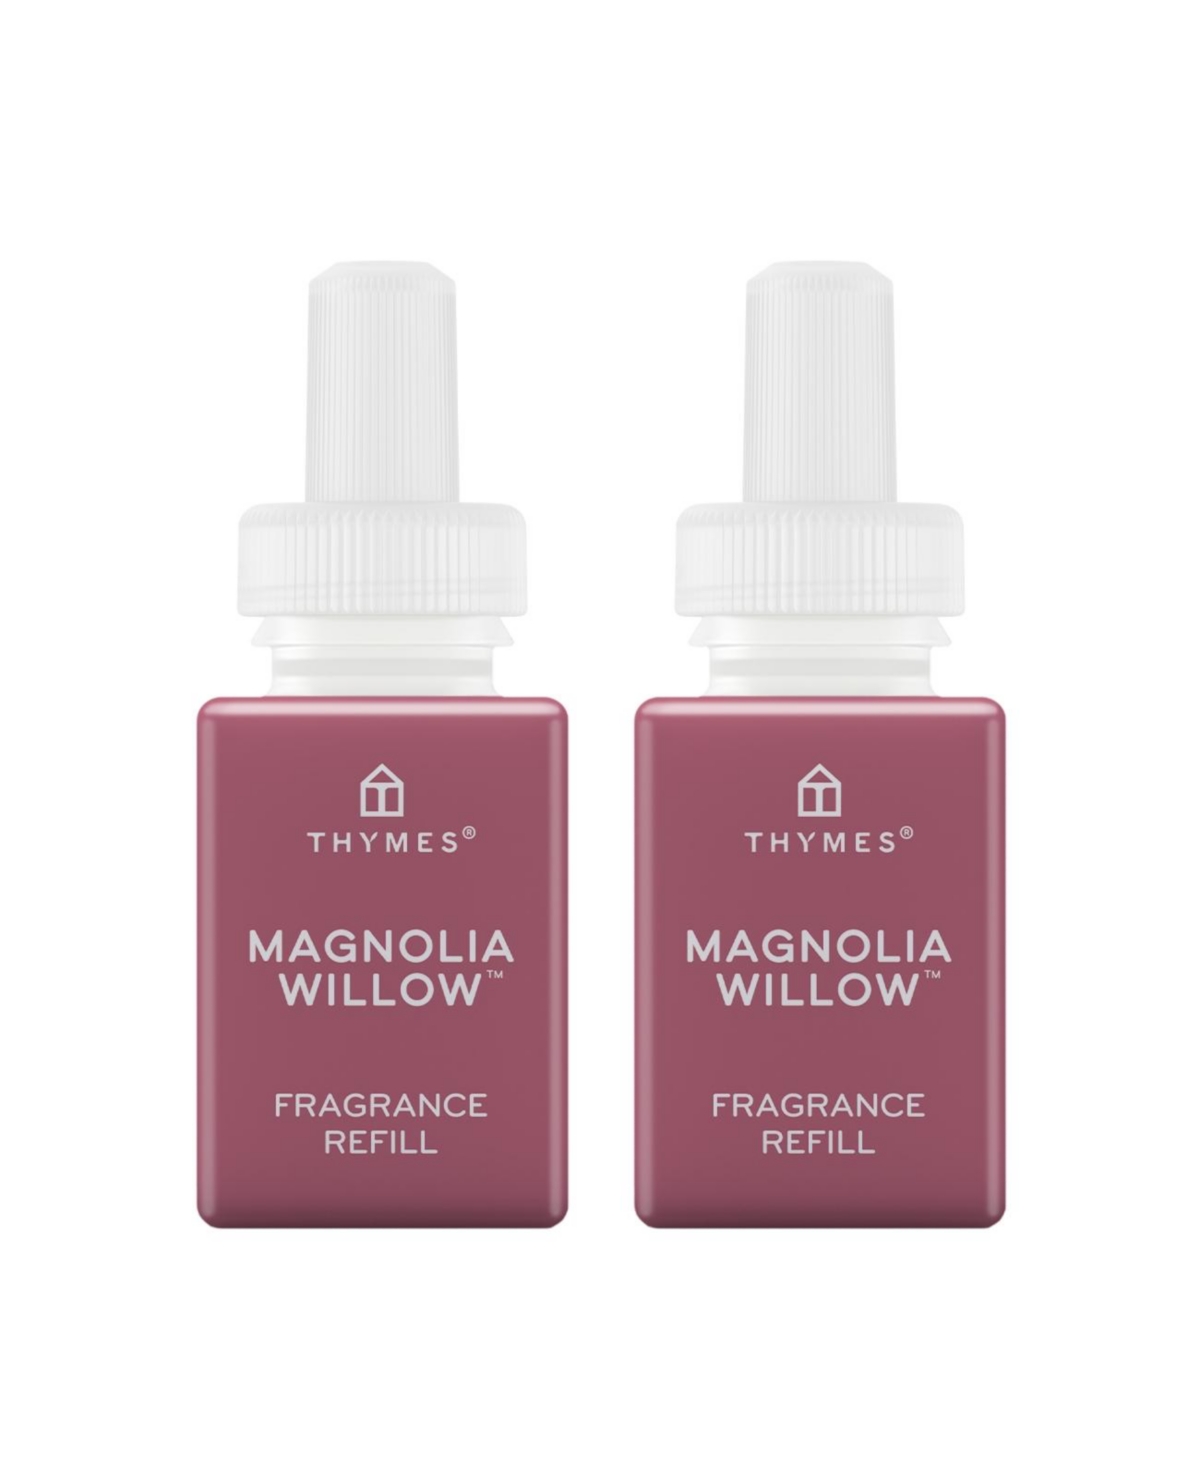 and Thymes - Magnolia Willow - Fragrance for Smart Home Air Diffusers - Room Freshener - Aromatherapy Scents for Bedrooms & Living Rooms - 2 Pack